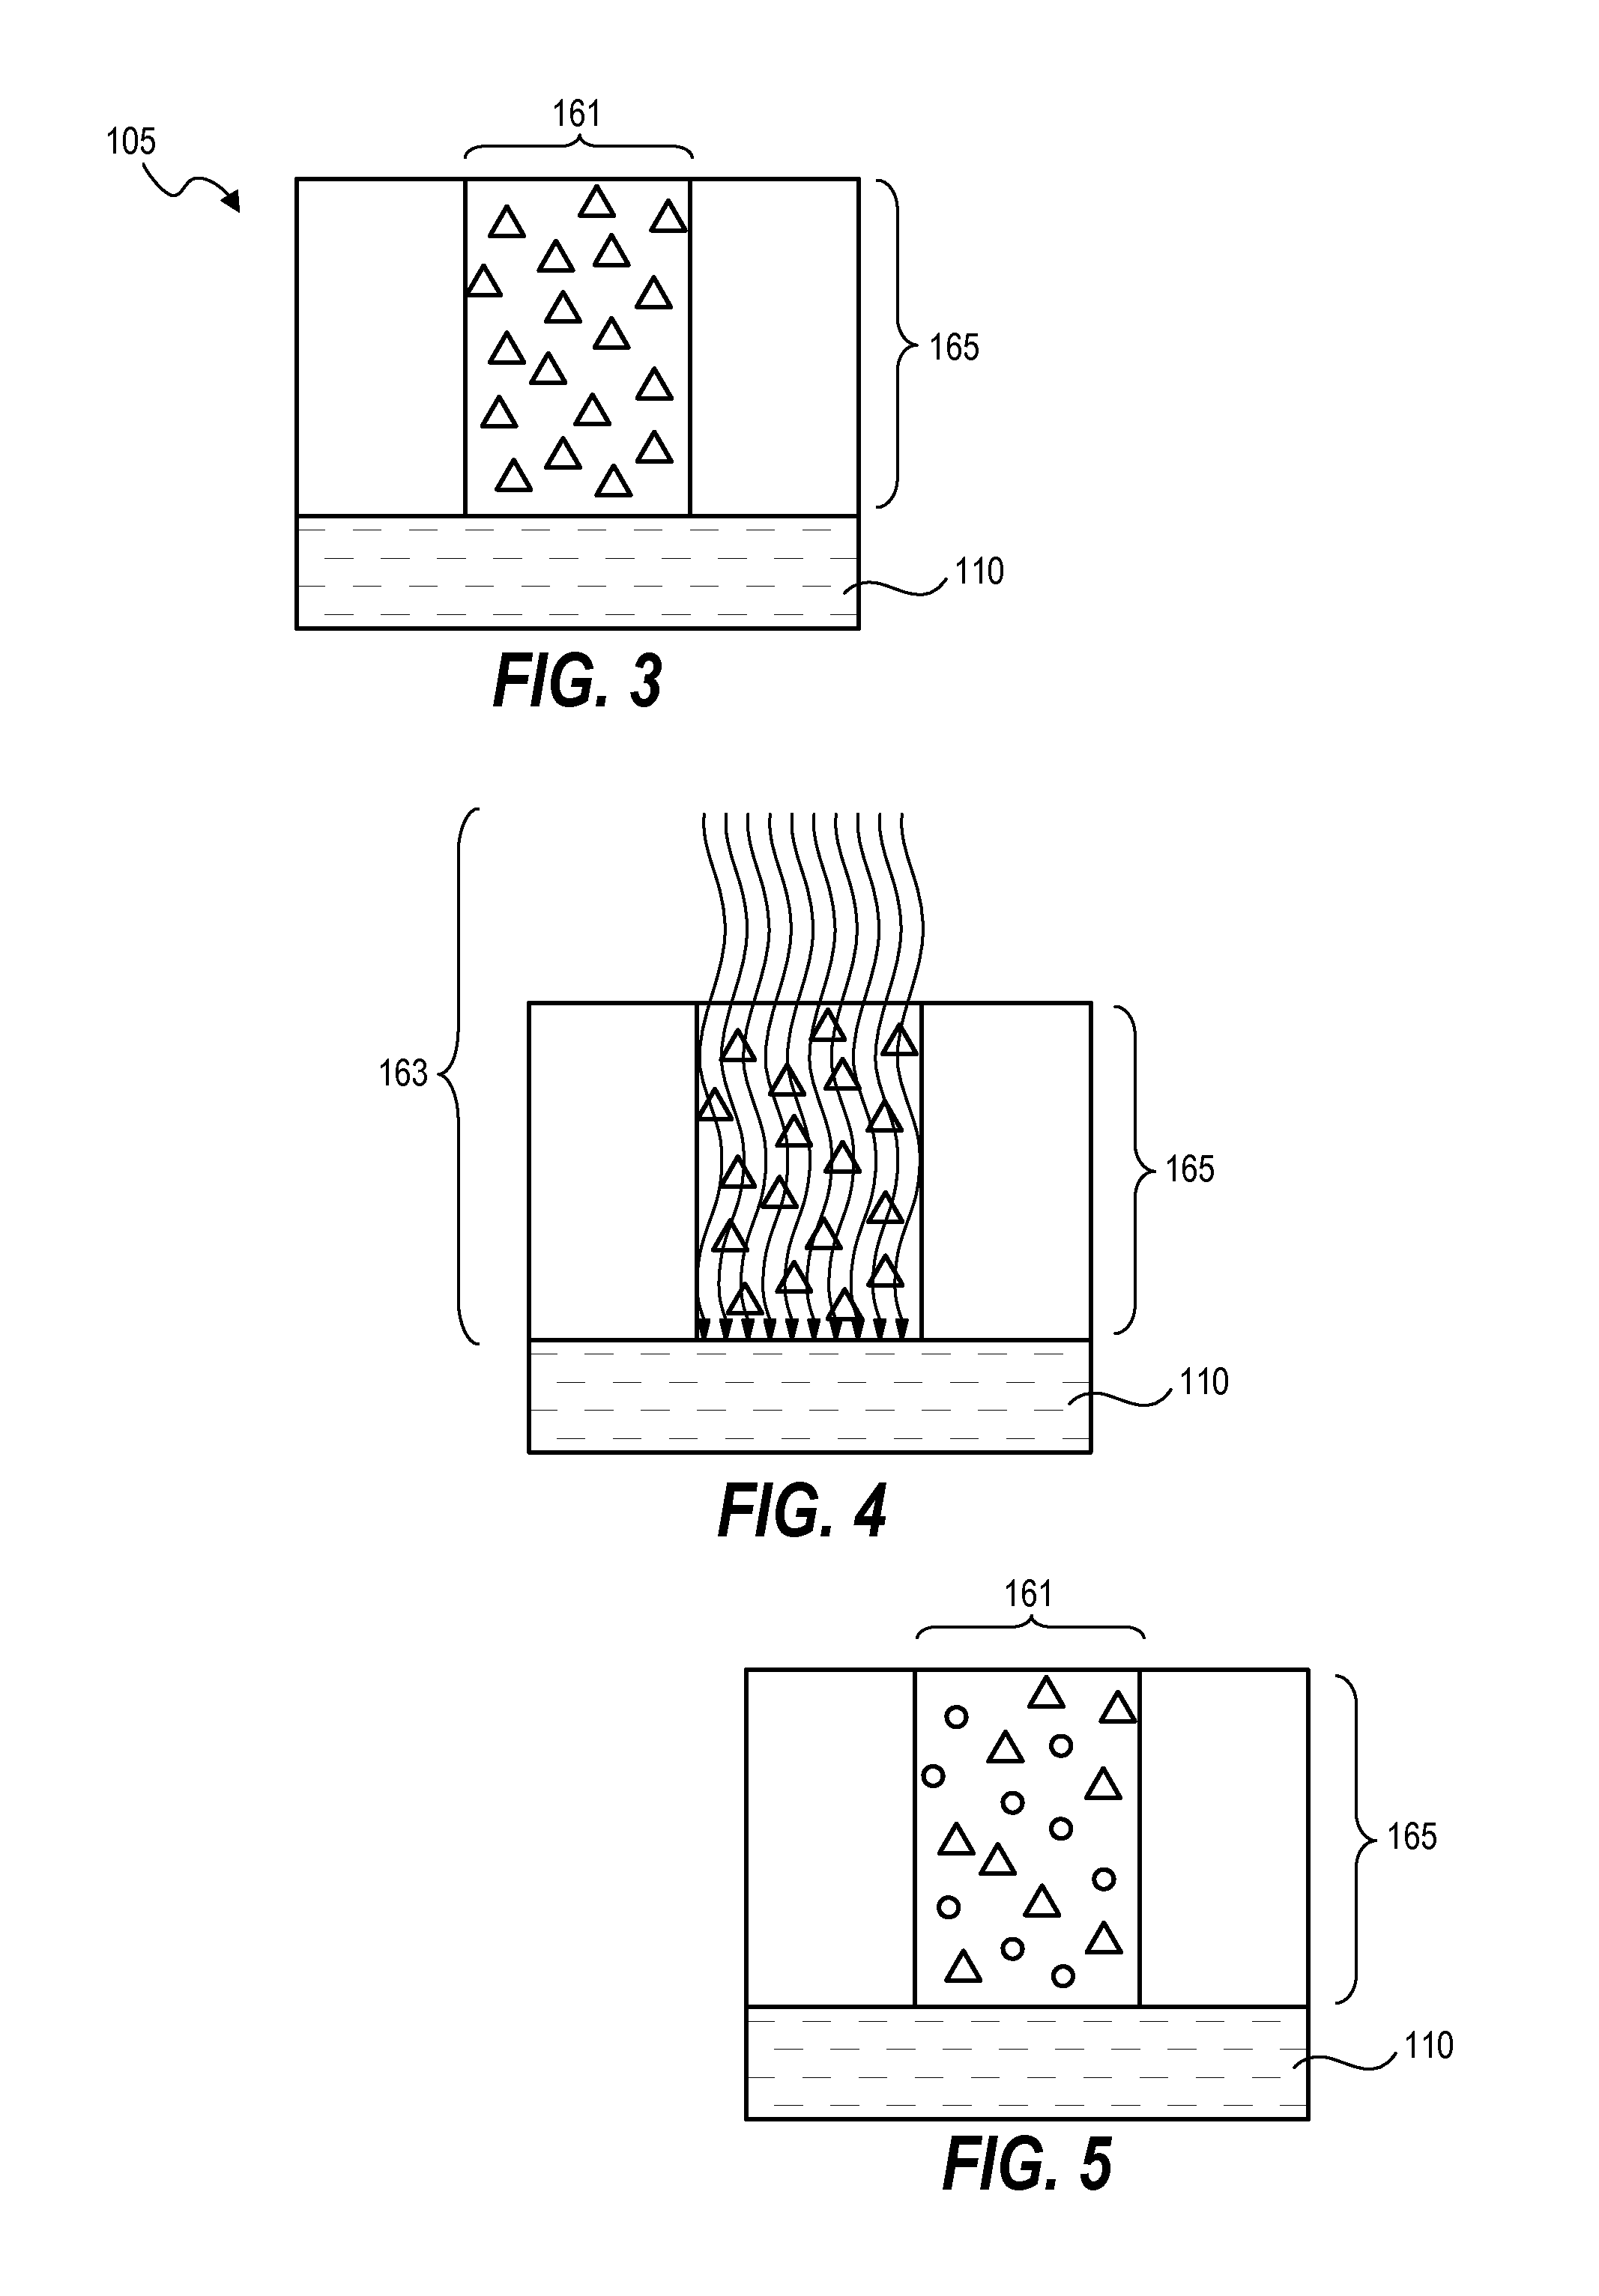 System and Method for Shifting Critical Dimensions of Patterned Films